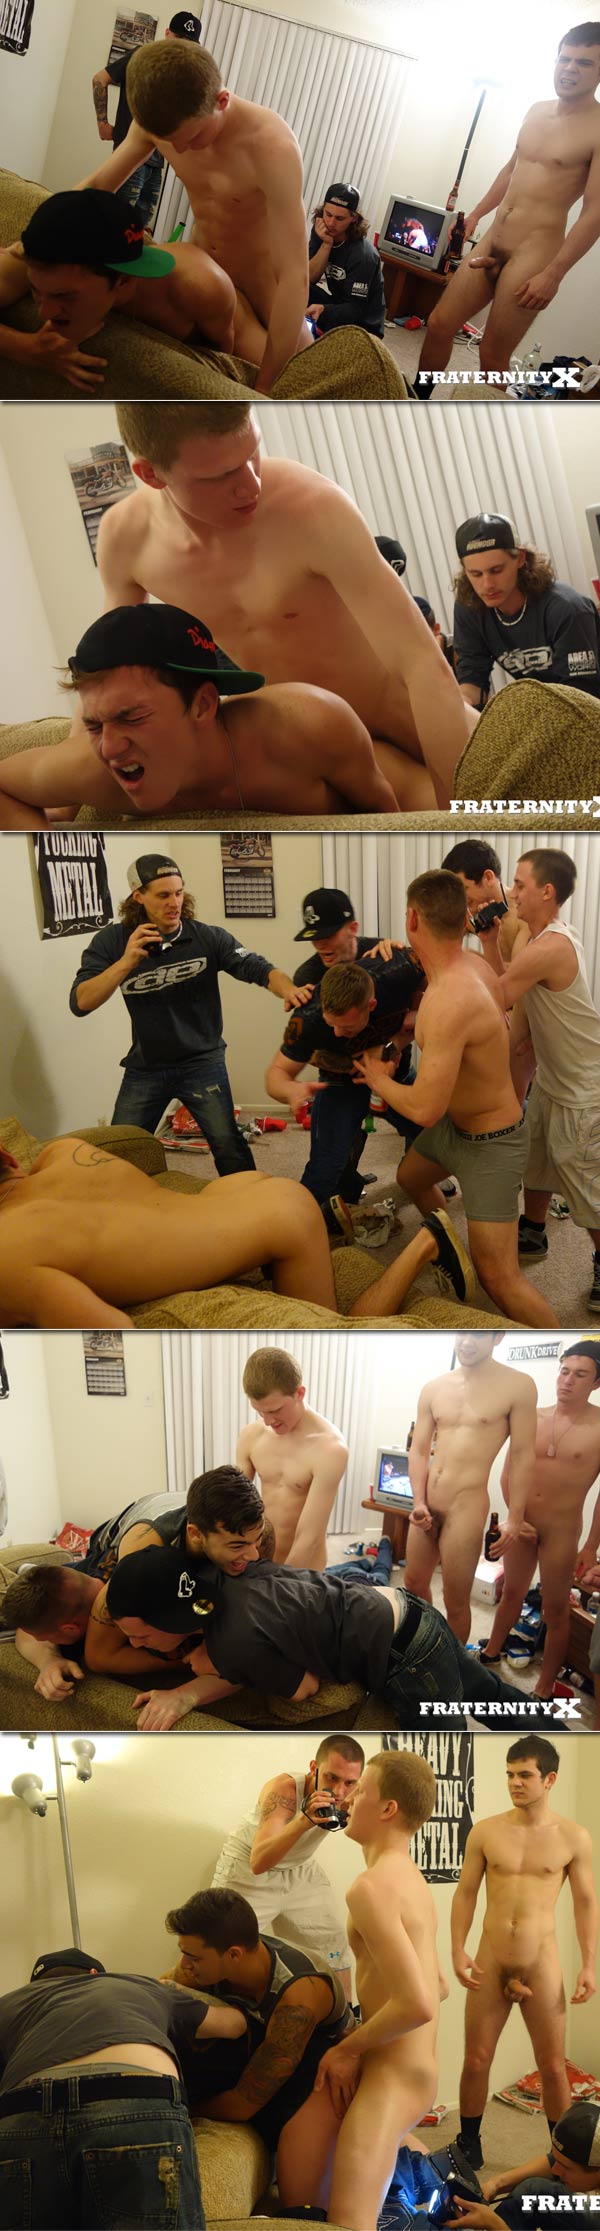 Gag and Tag (Bareback) it at FraternityX